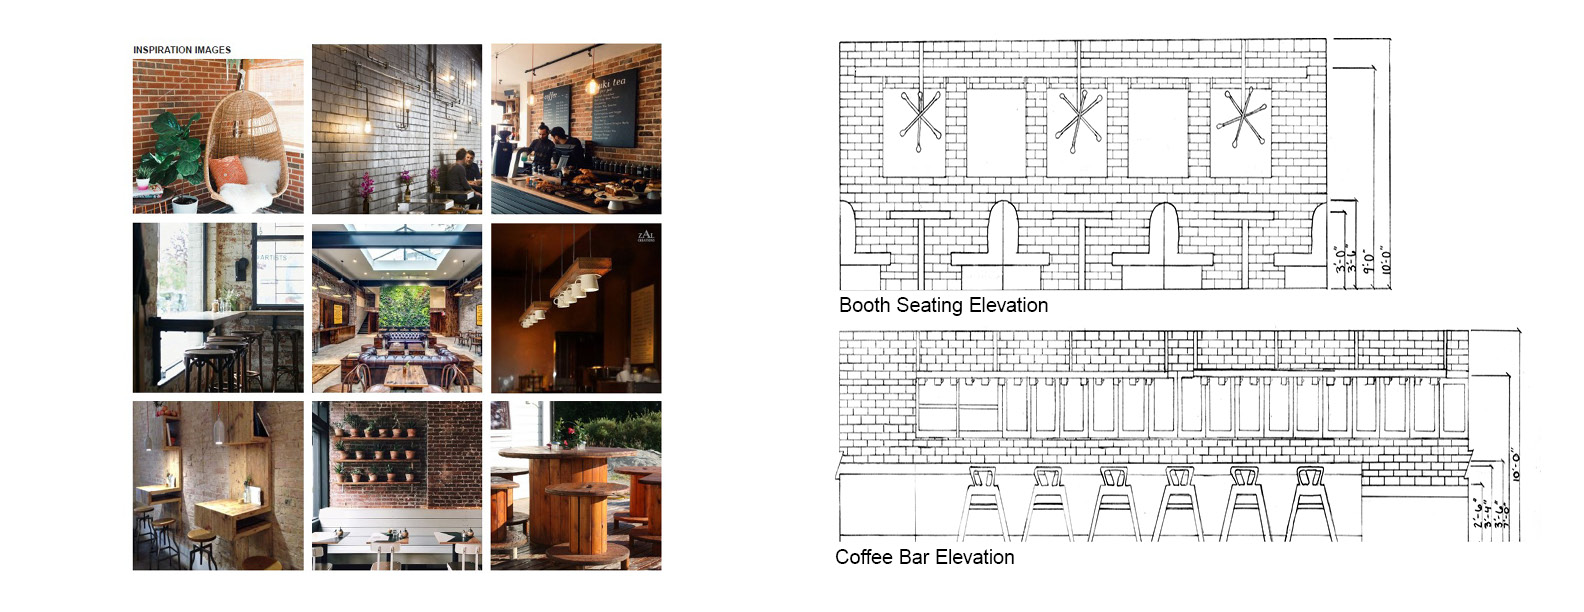 Jupiter house coffee - Booth seating and coffee bar elevations